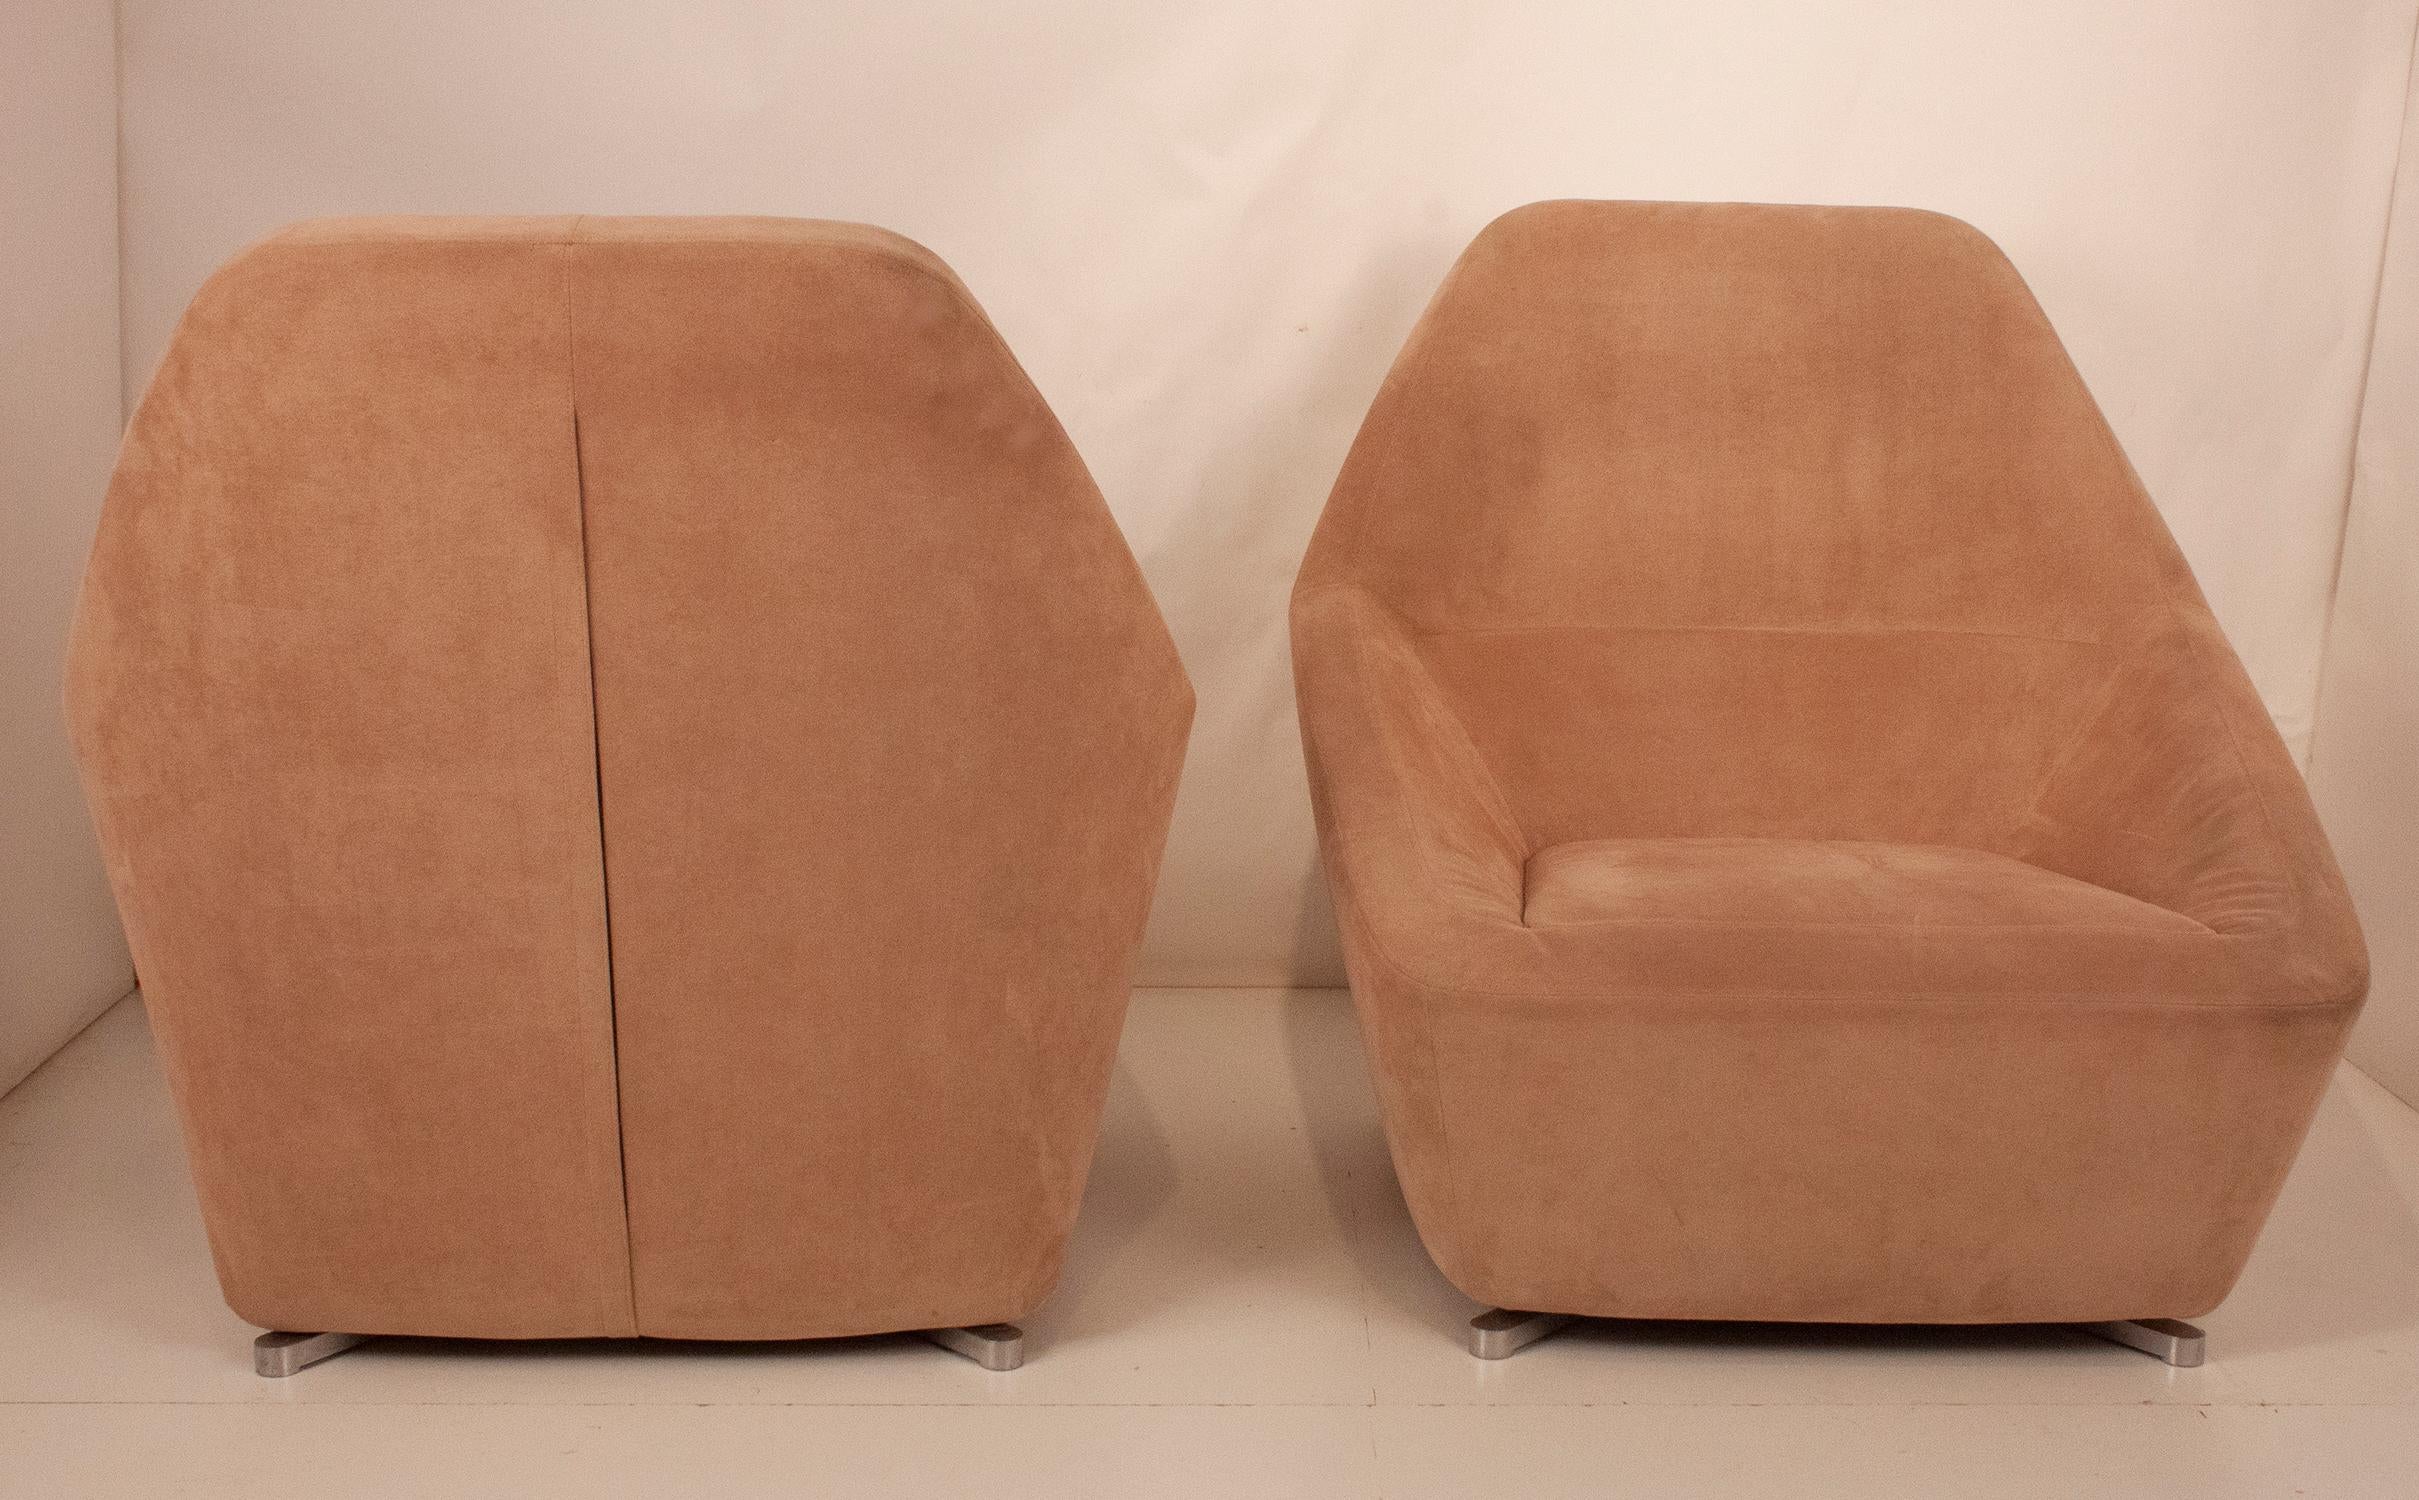 Metal Modern Pair of Pink Suede Armchairs,  by François Bauchet for Cinna, 2000's